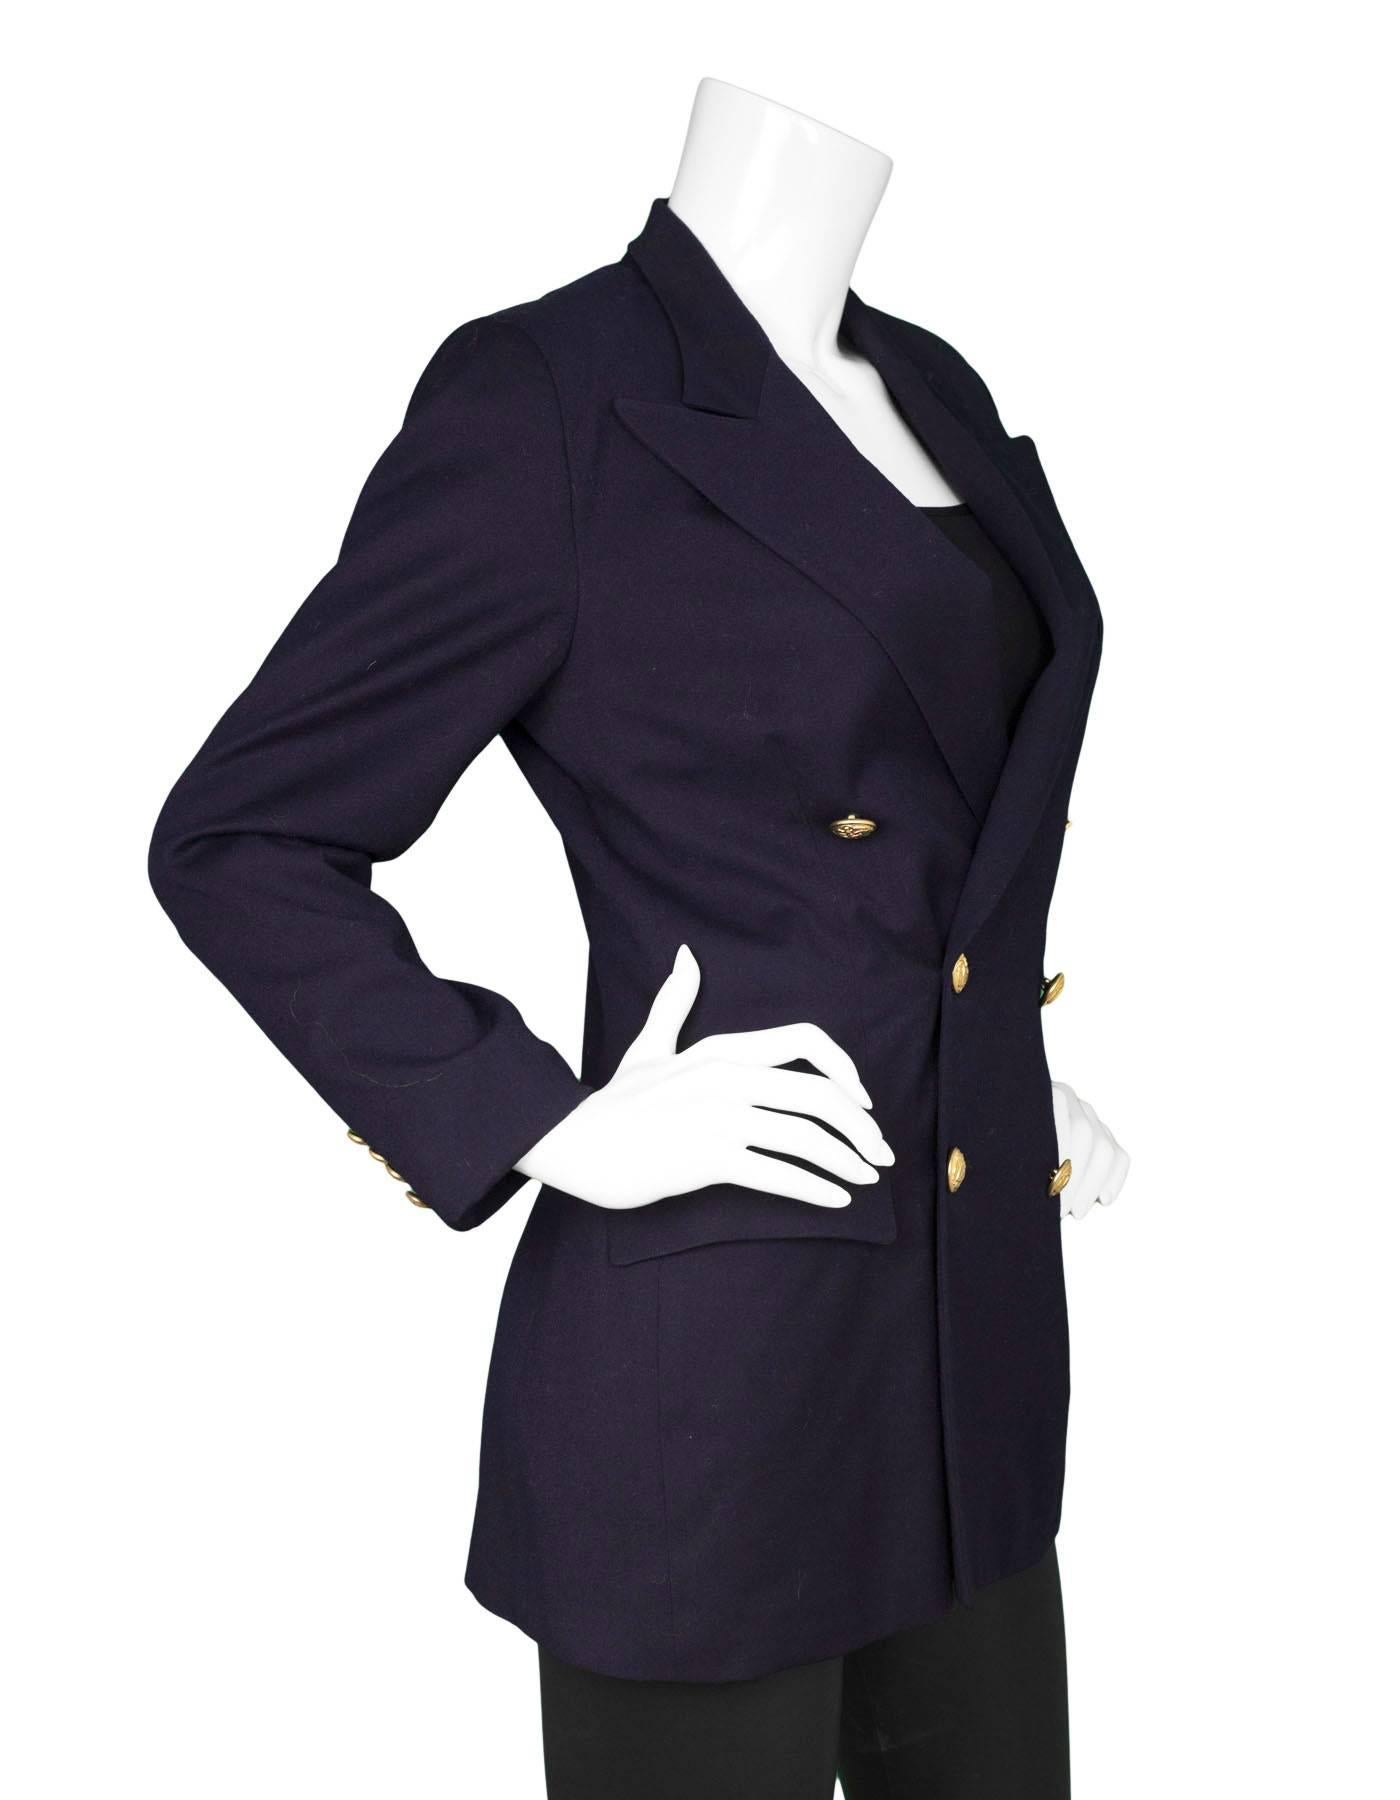 Ralph Lauren Navy Wool Double Breasted Jacket
Features goldtone nautical detailed buttons

Made In: USA
Color: Navy
Composition: 100% wool
Lining: Navy, silk-blend
Closure/Opening: Double breasted button down
Exterior Pockets: Two hip flap